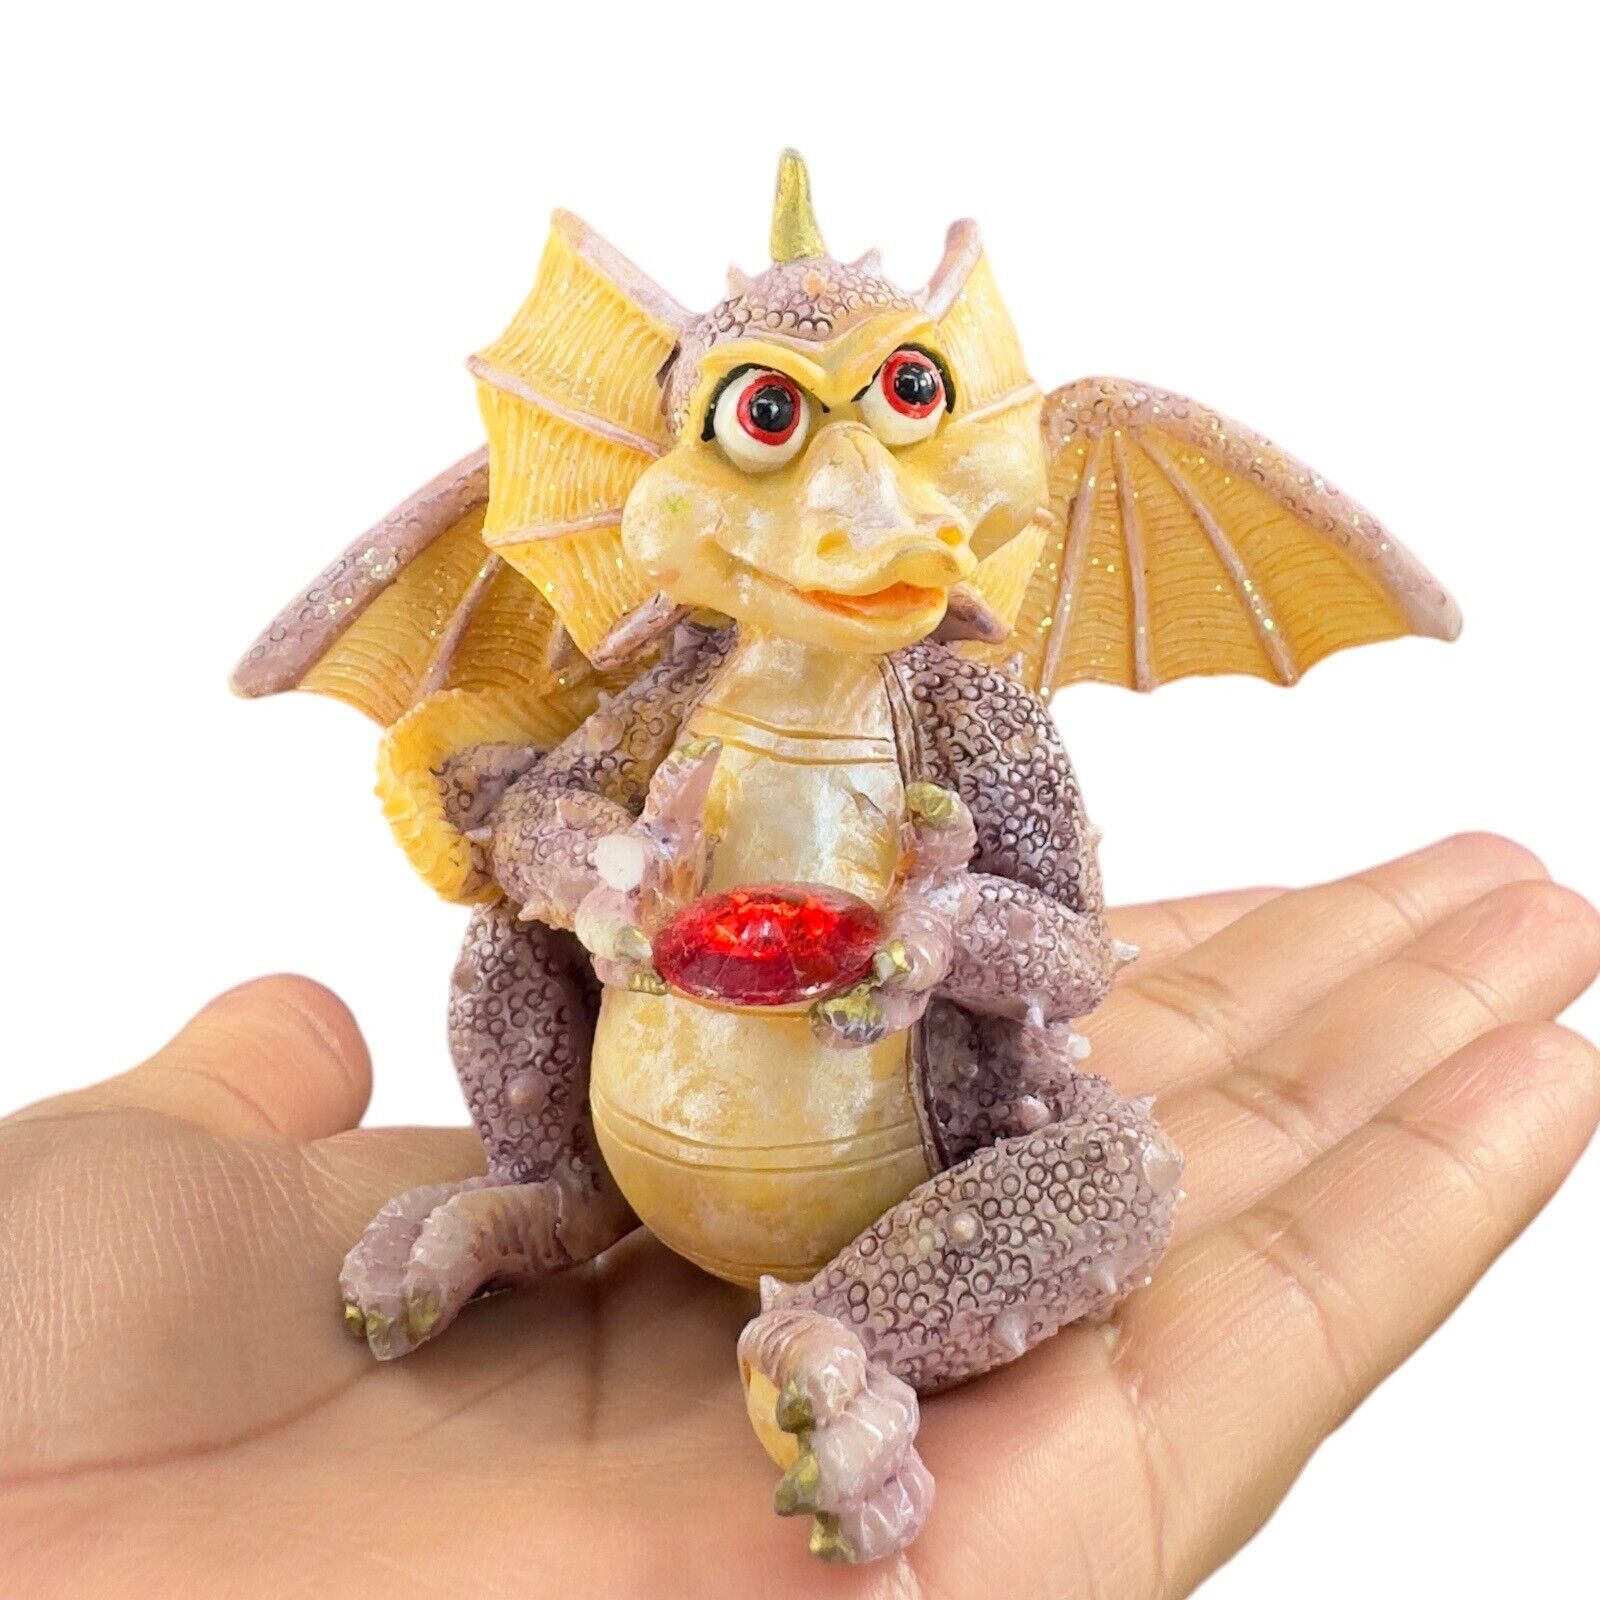 Creepy Dragon Figurine Holding A Red Gem Stone Whimsical Figure 4”Wide 3”Tall